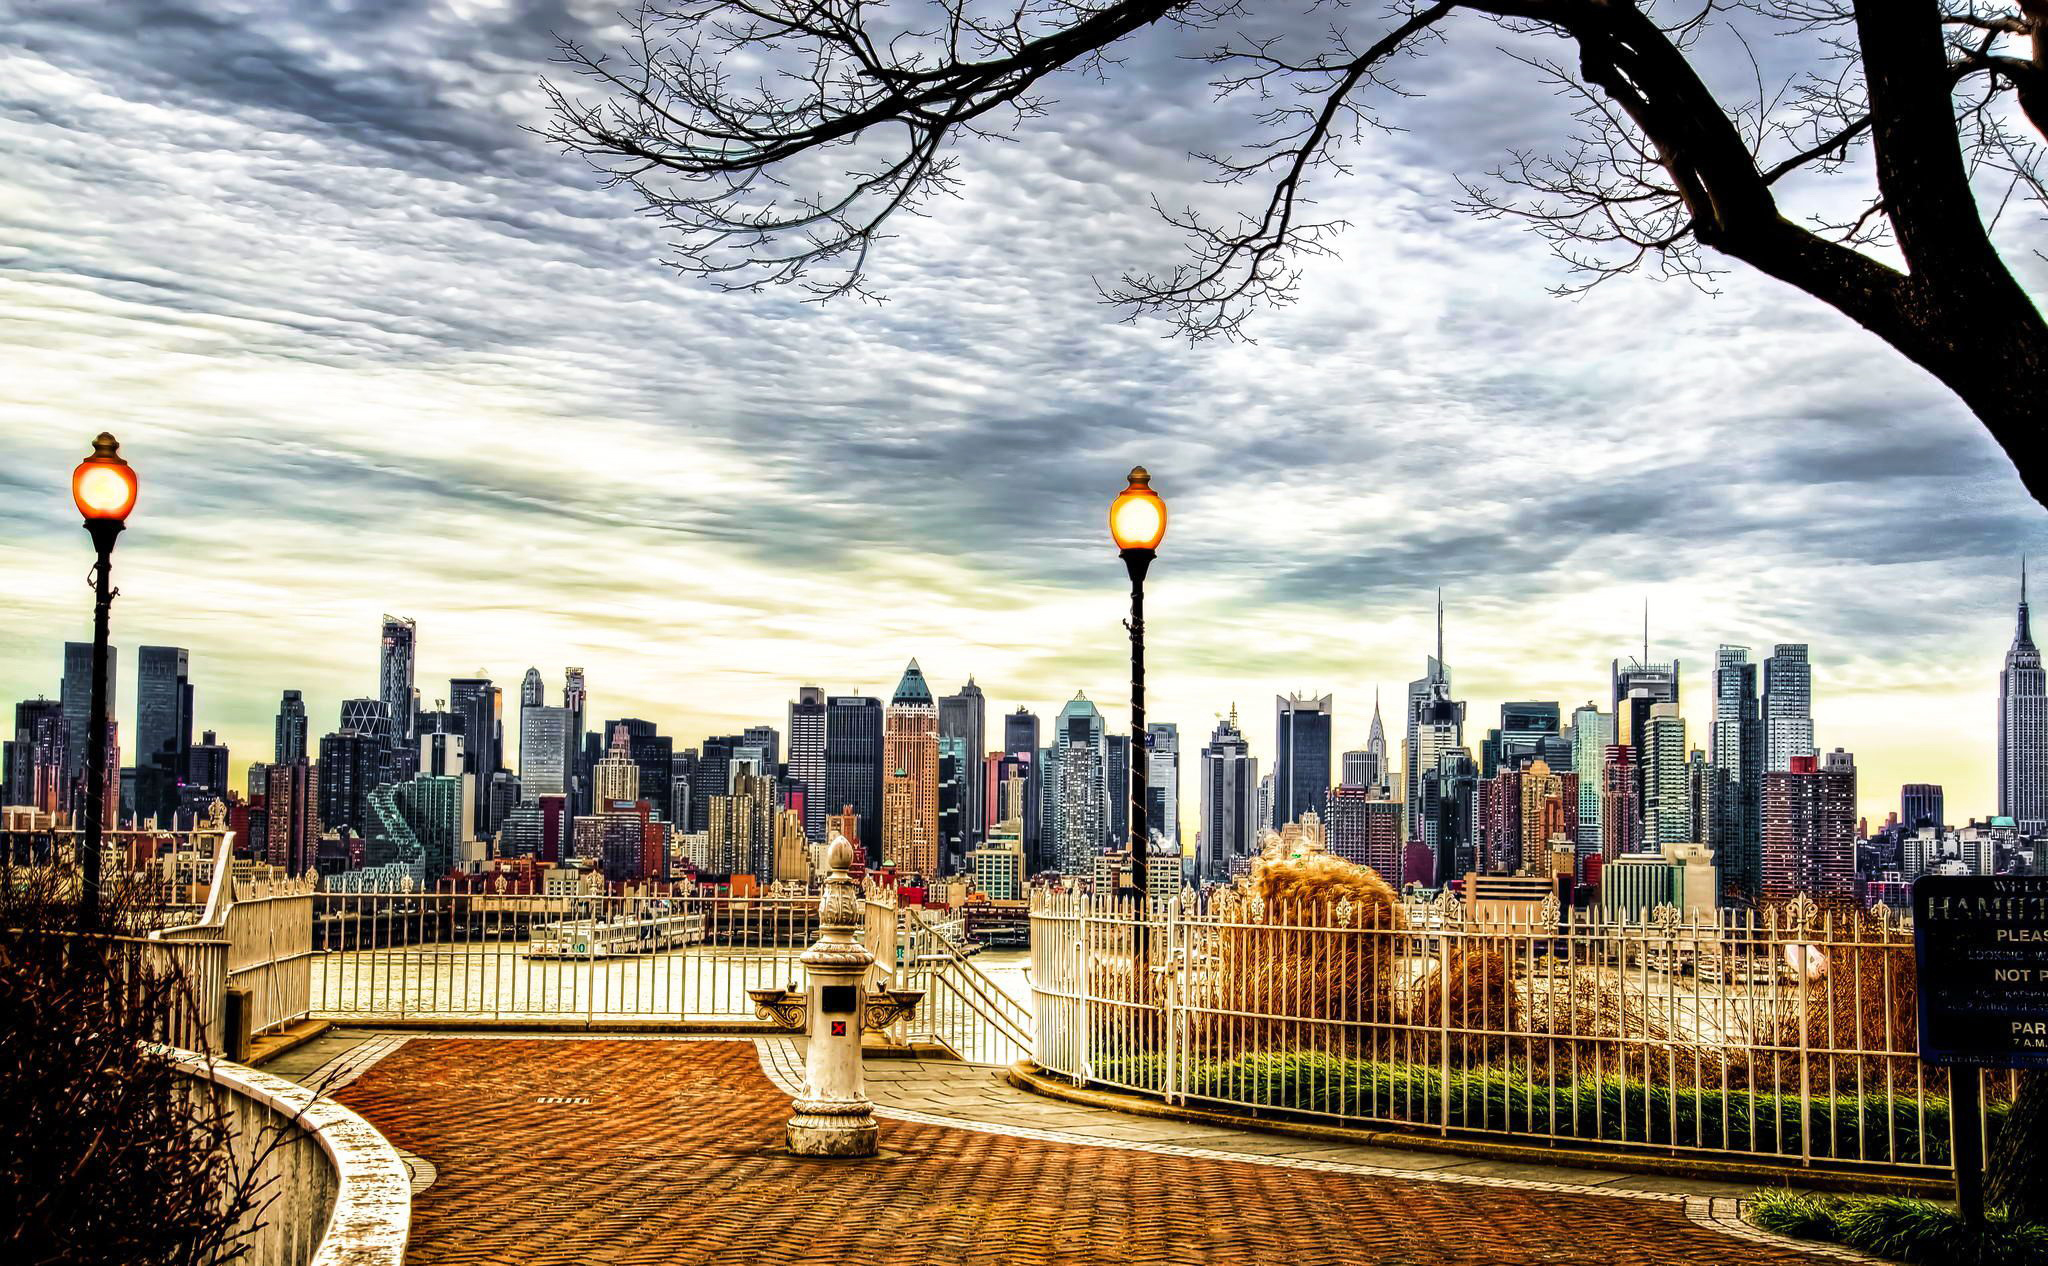 306 New York HD Wallpapers | Backgrounds - Wallpaper Abyss - Page 9